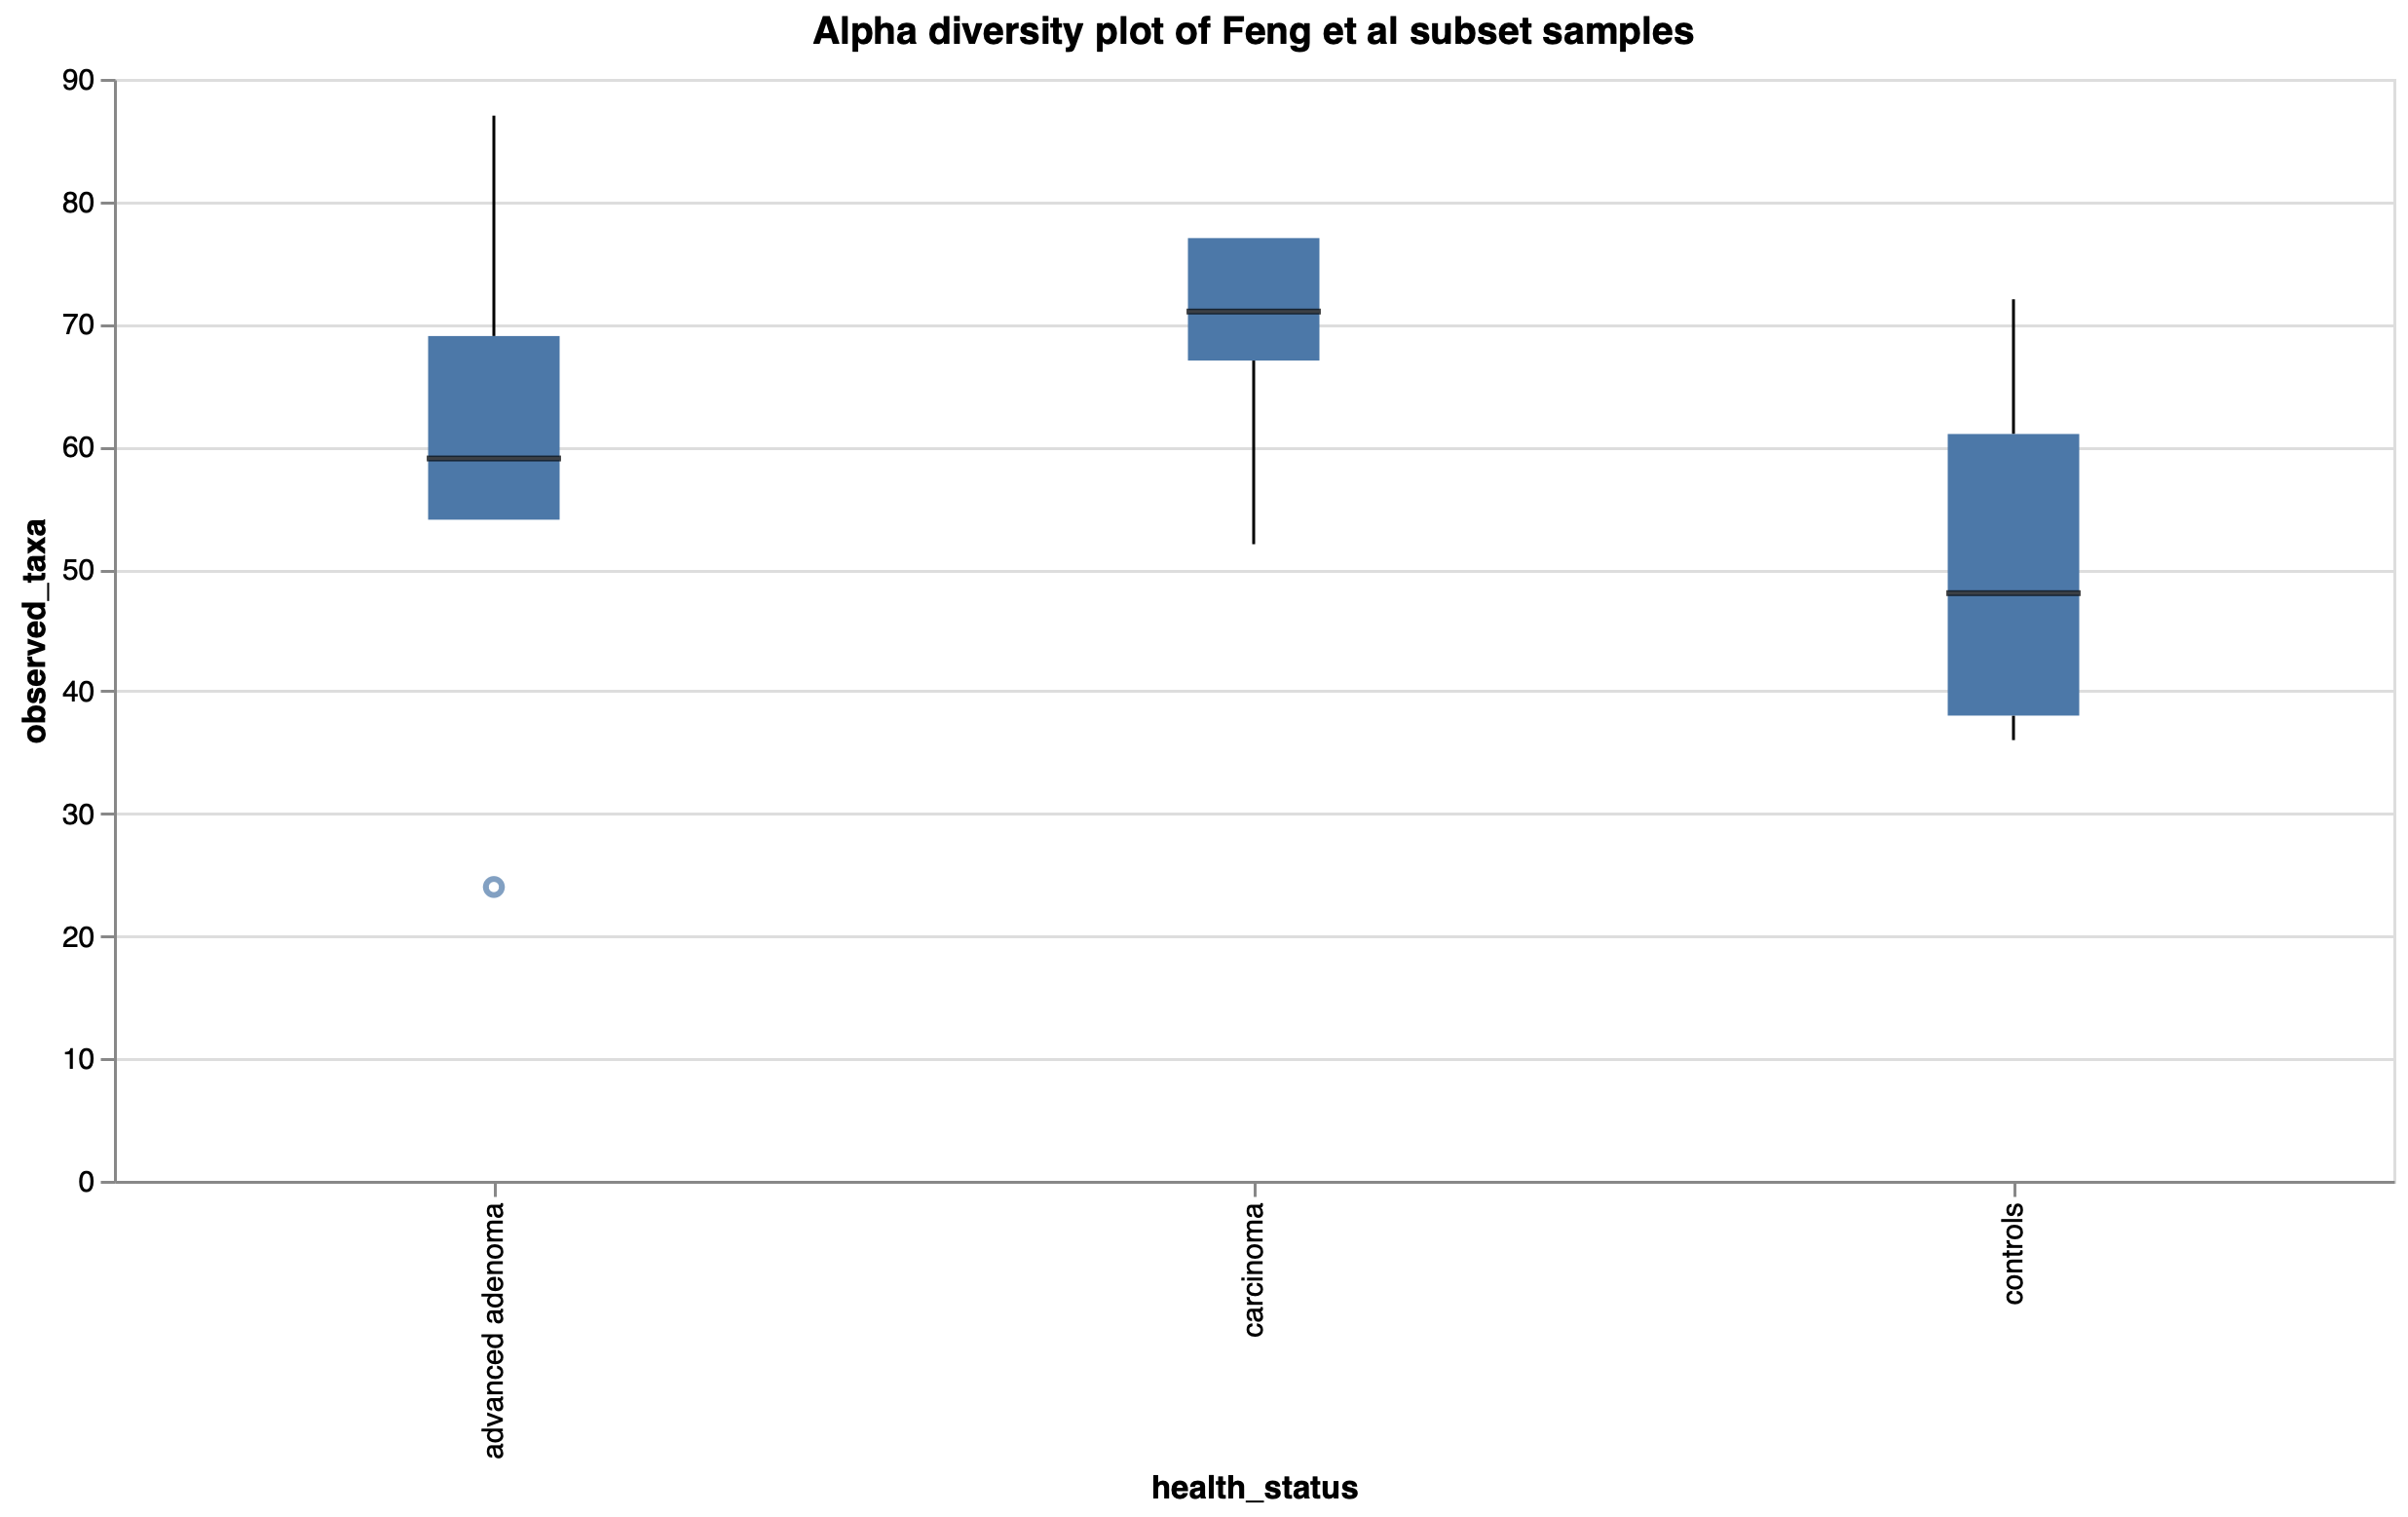 Figure 2: Observed taxa (genera) boxplot by health status in a subset of Feng et al samples.